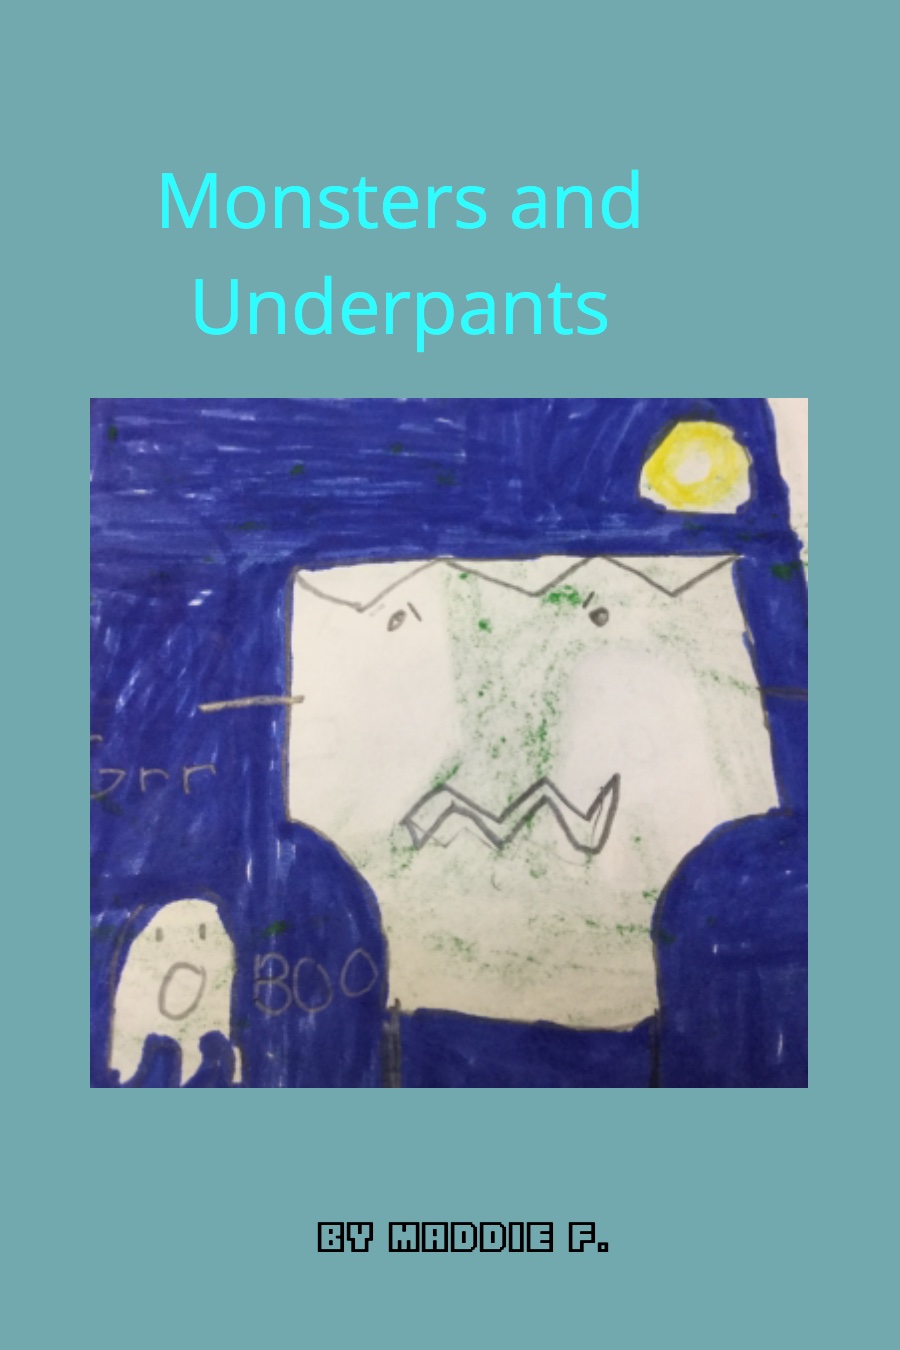 Monsters and underpants by Madeleine F